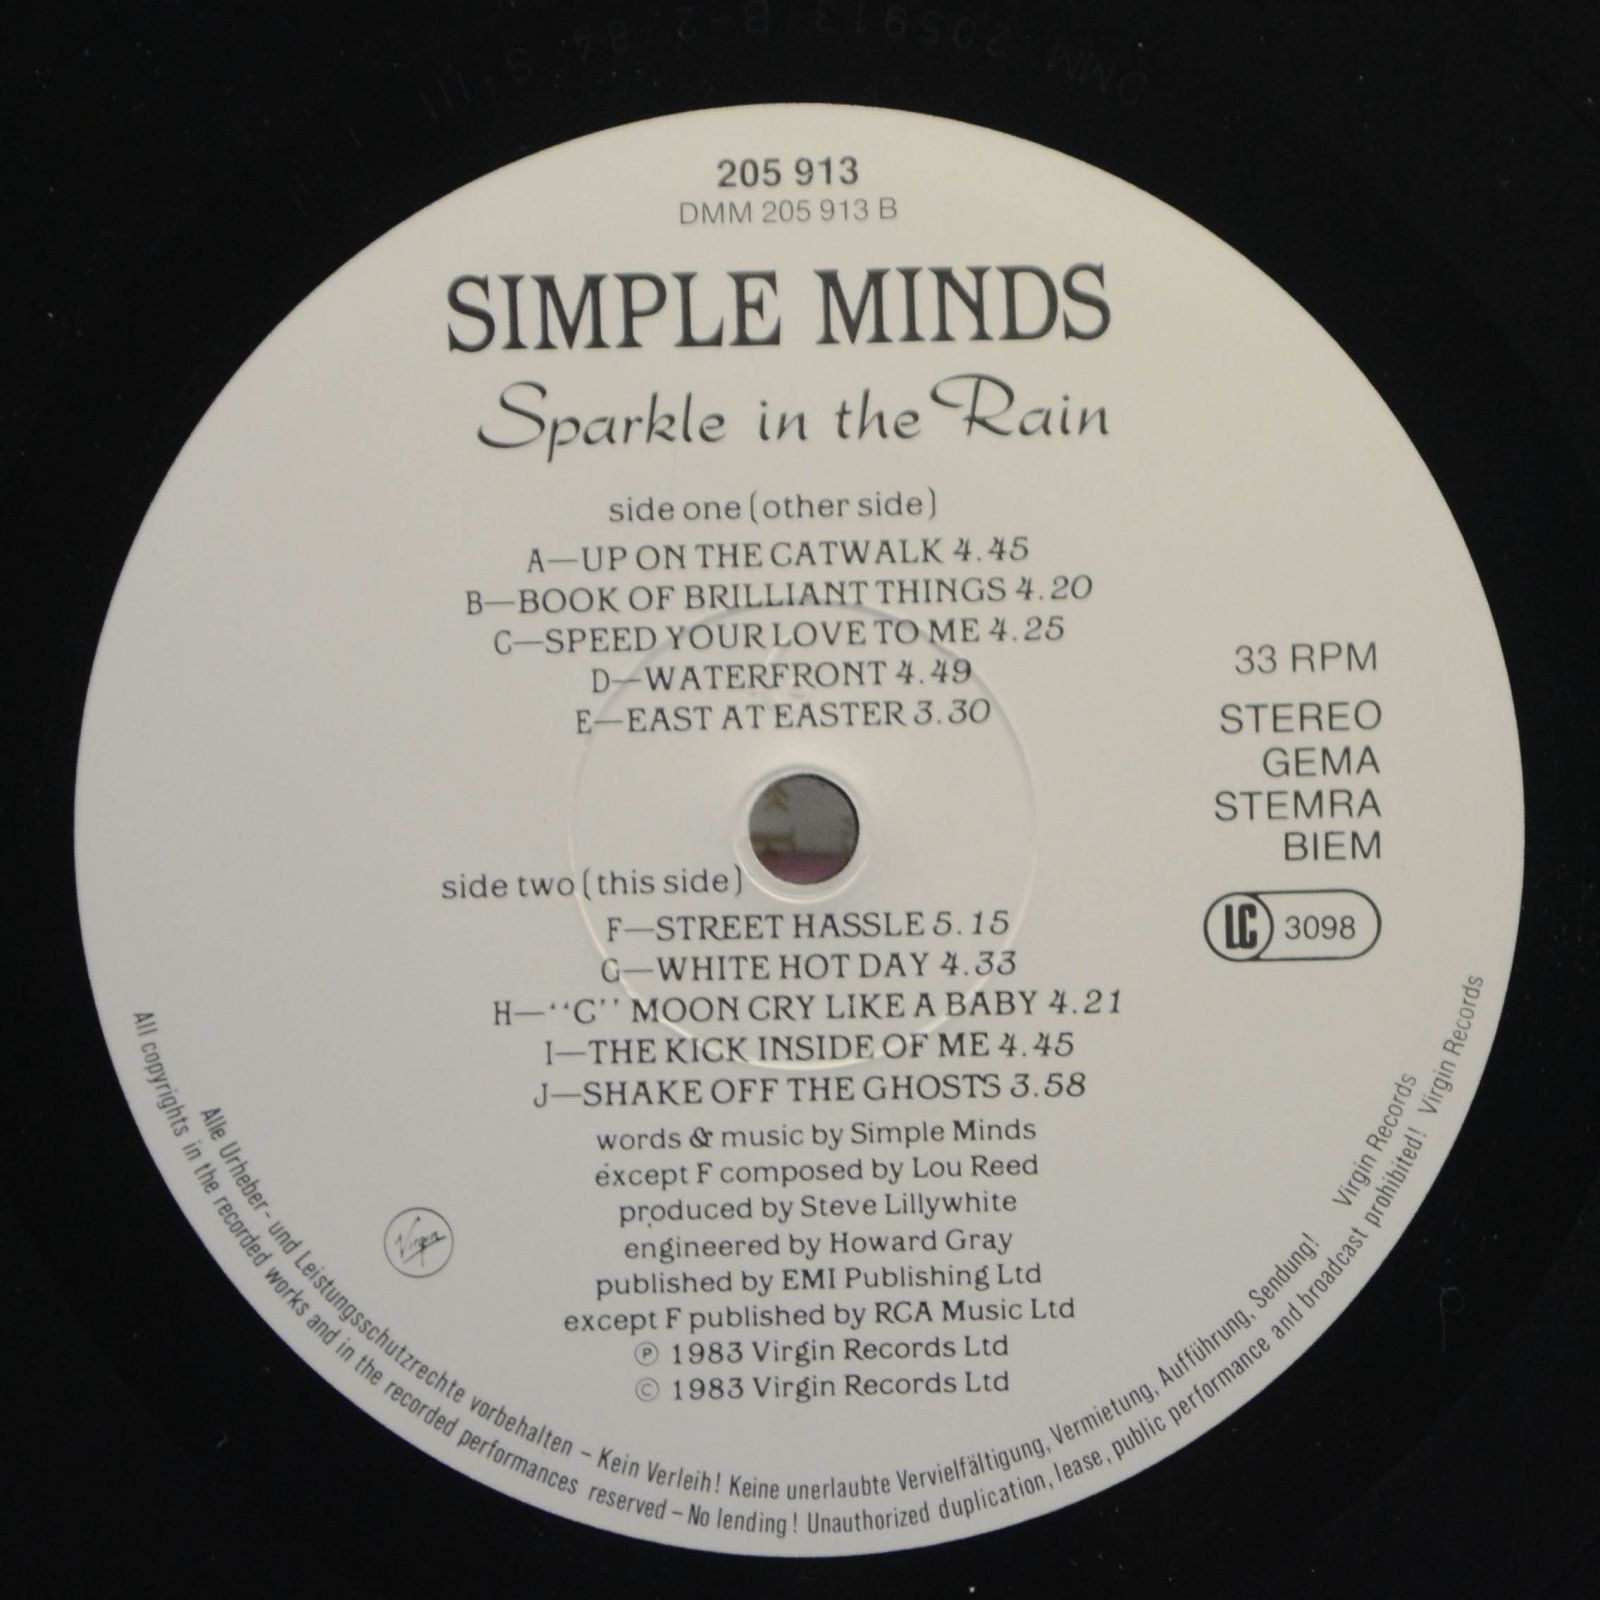 Simple Minds — Sparkle In The Rain, 1984